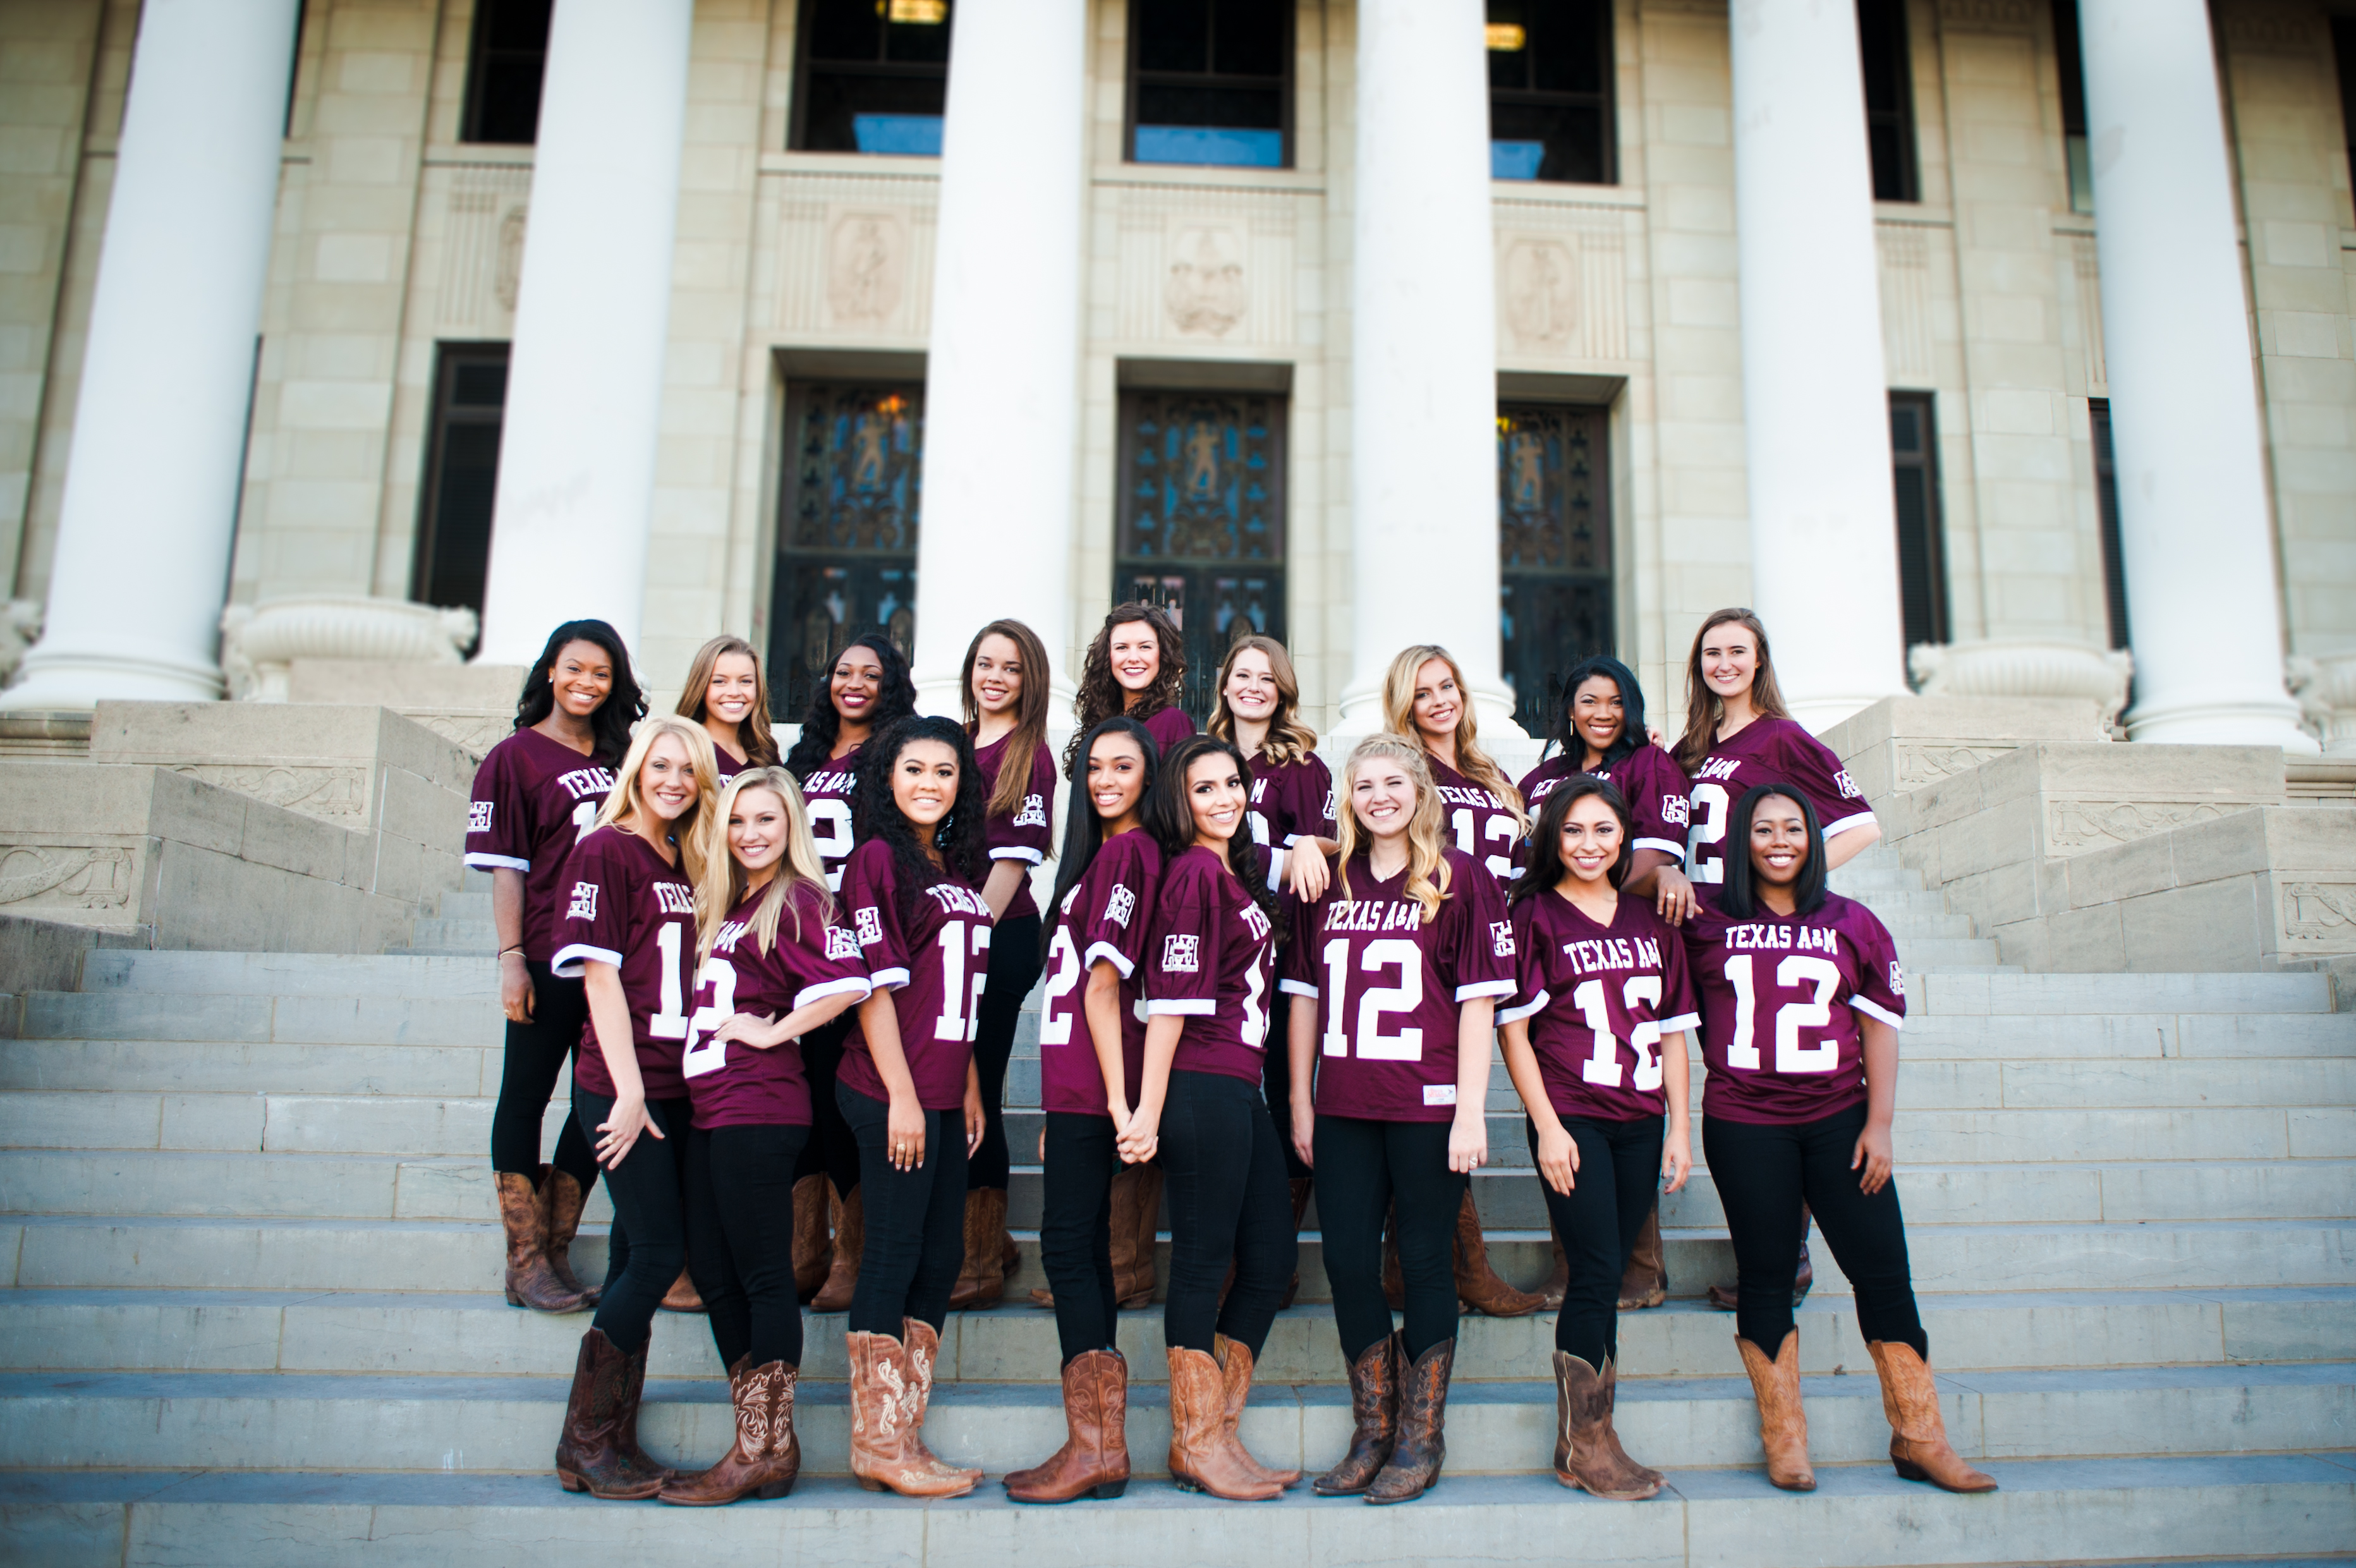 About | Aggie Hostesses